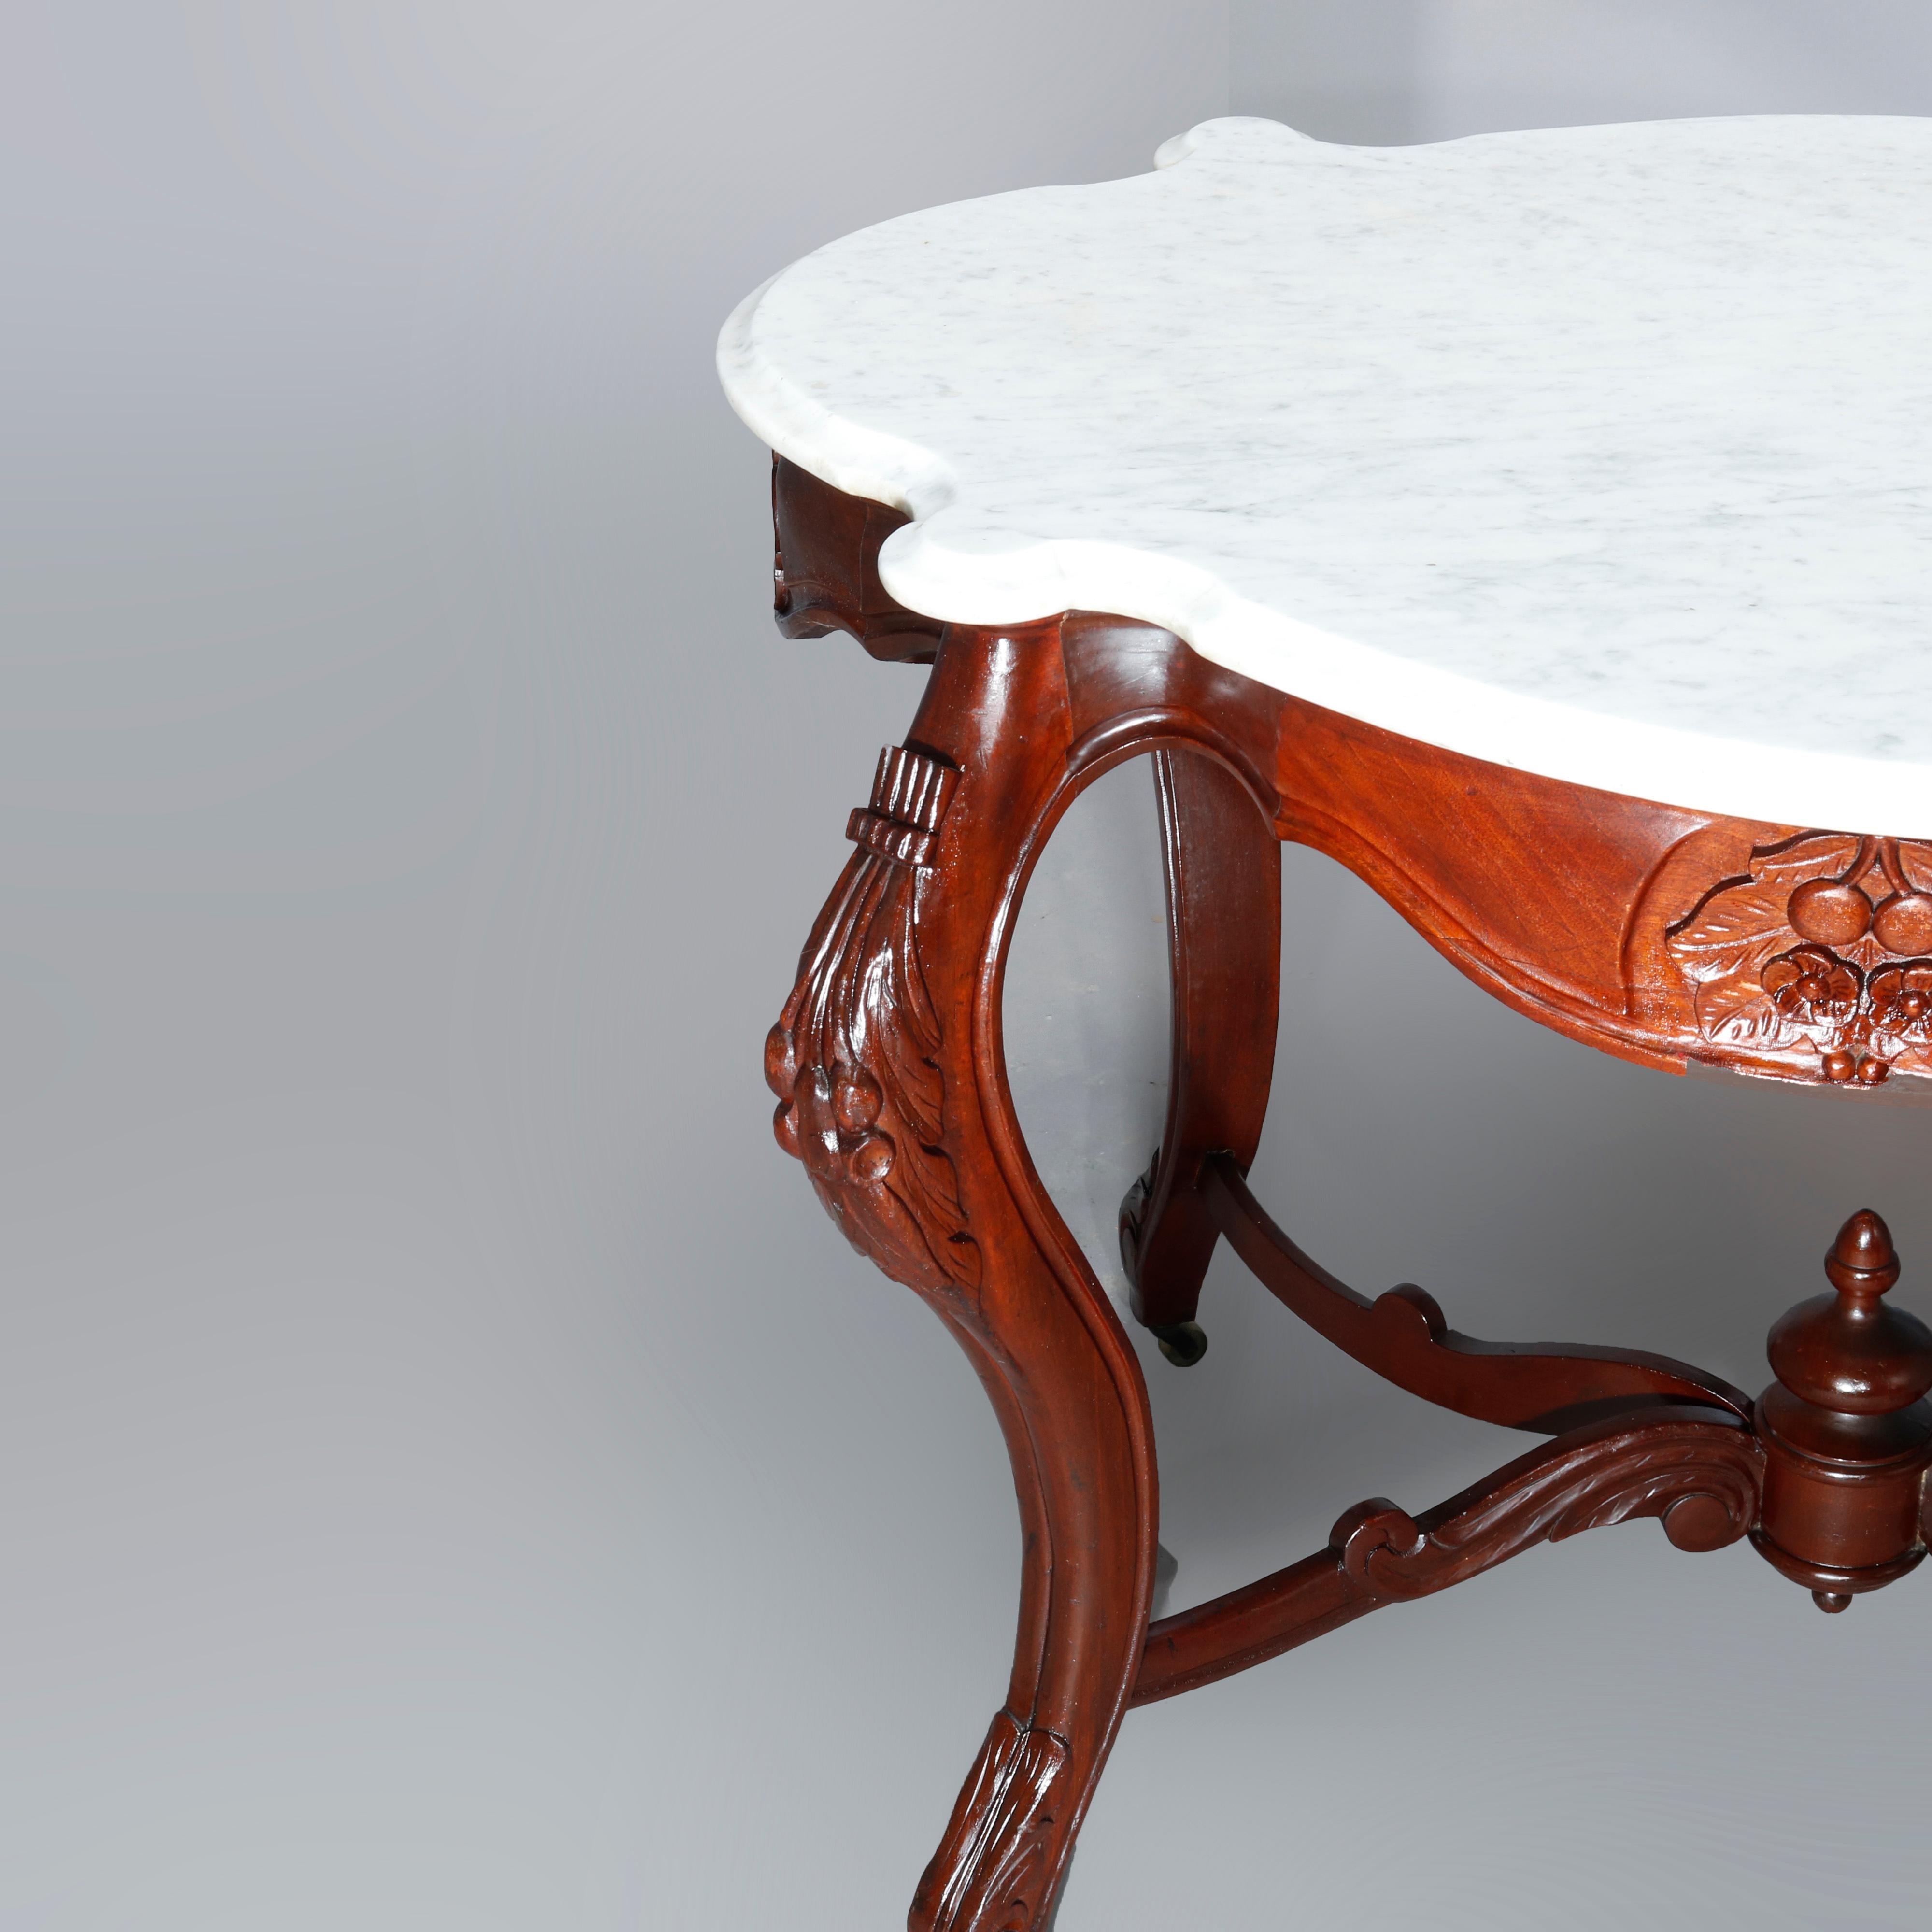 European Antique Rococo Revival Turtle Top Carved Walnut & Marble Center Table, c1870